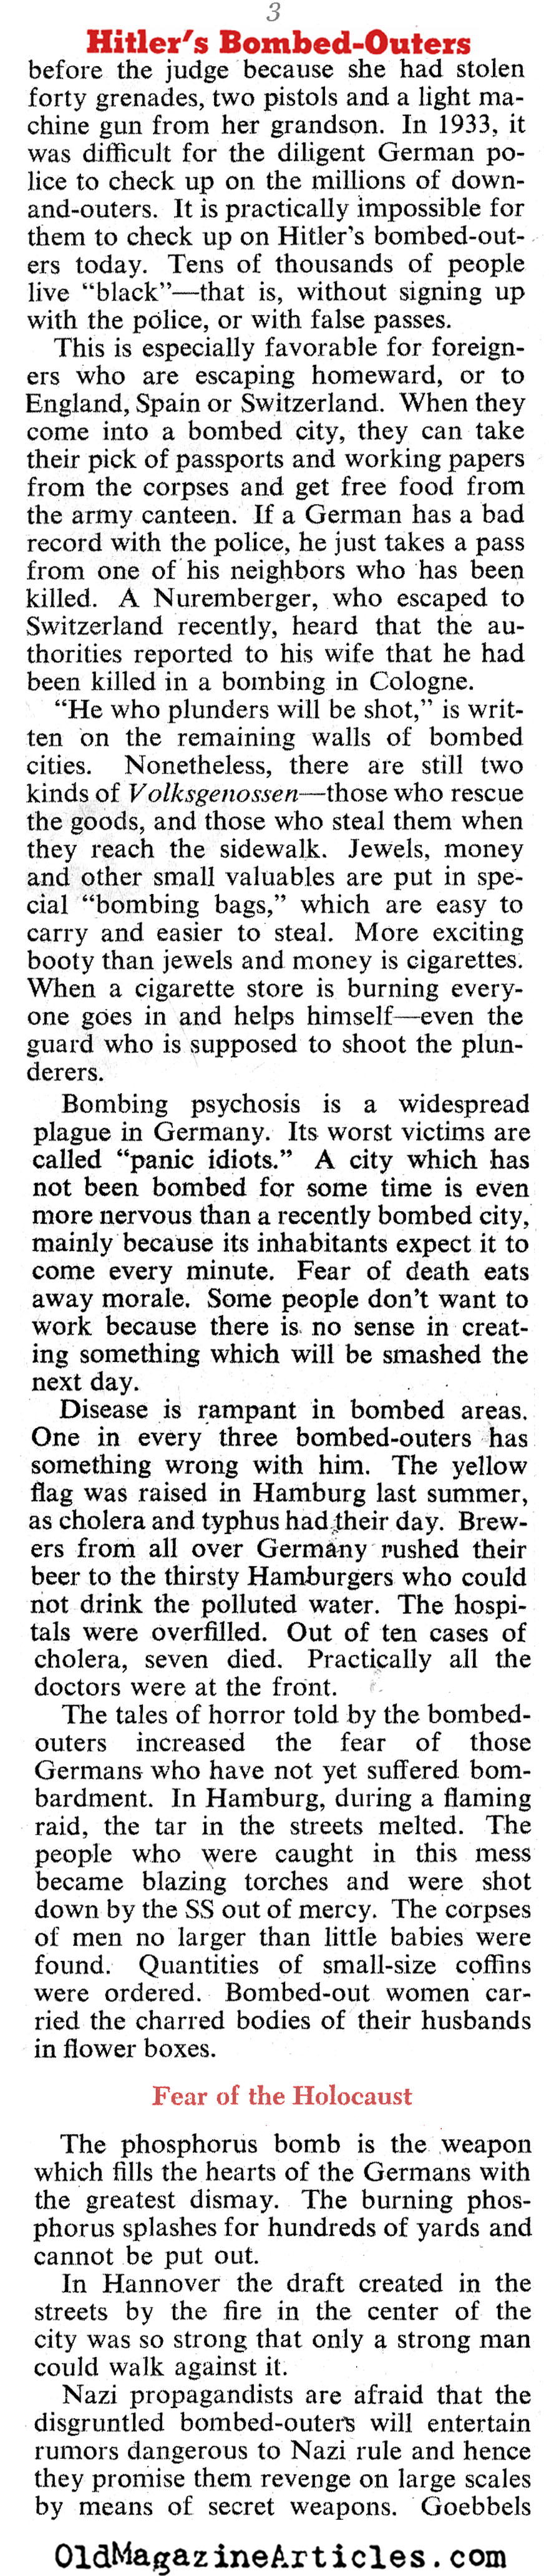 The Bombed-Out Germans (Collier's Magazine, 1944)